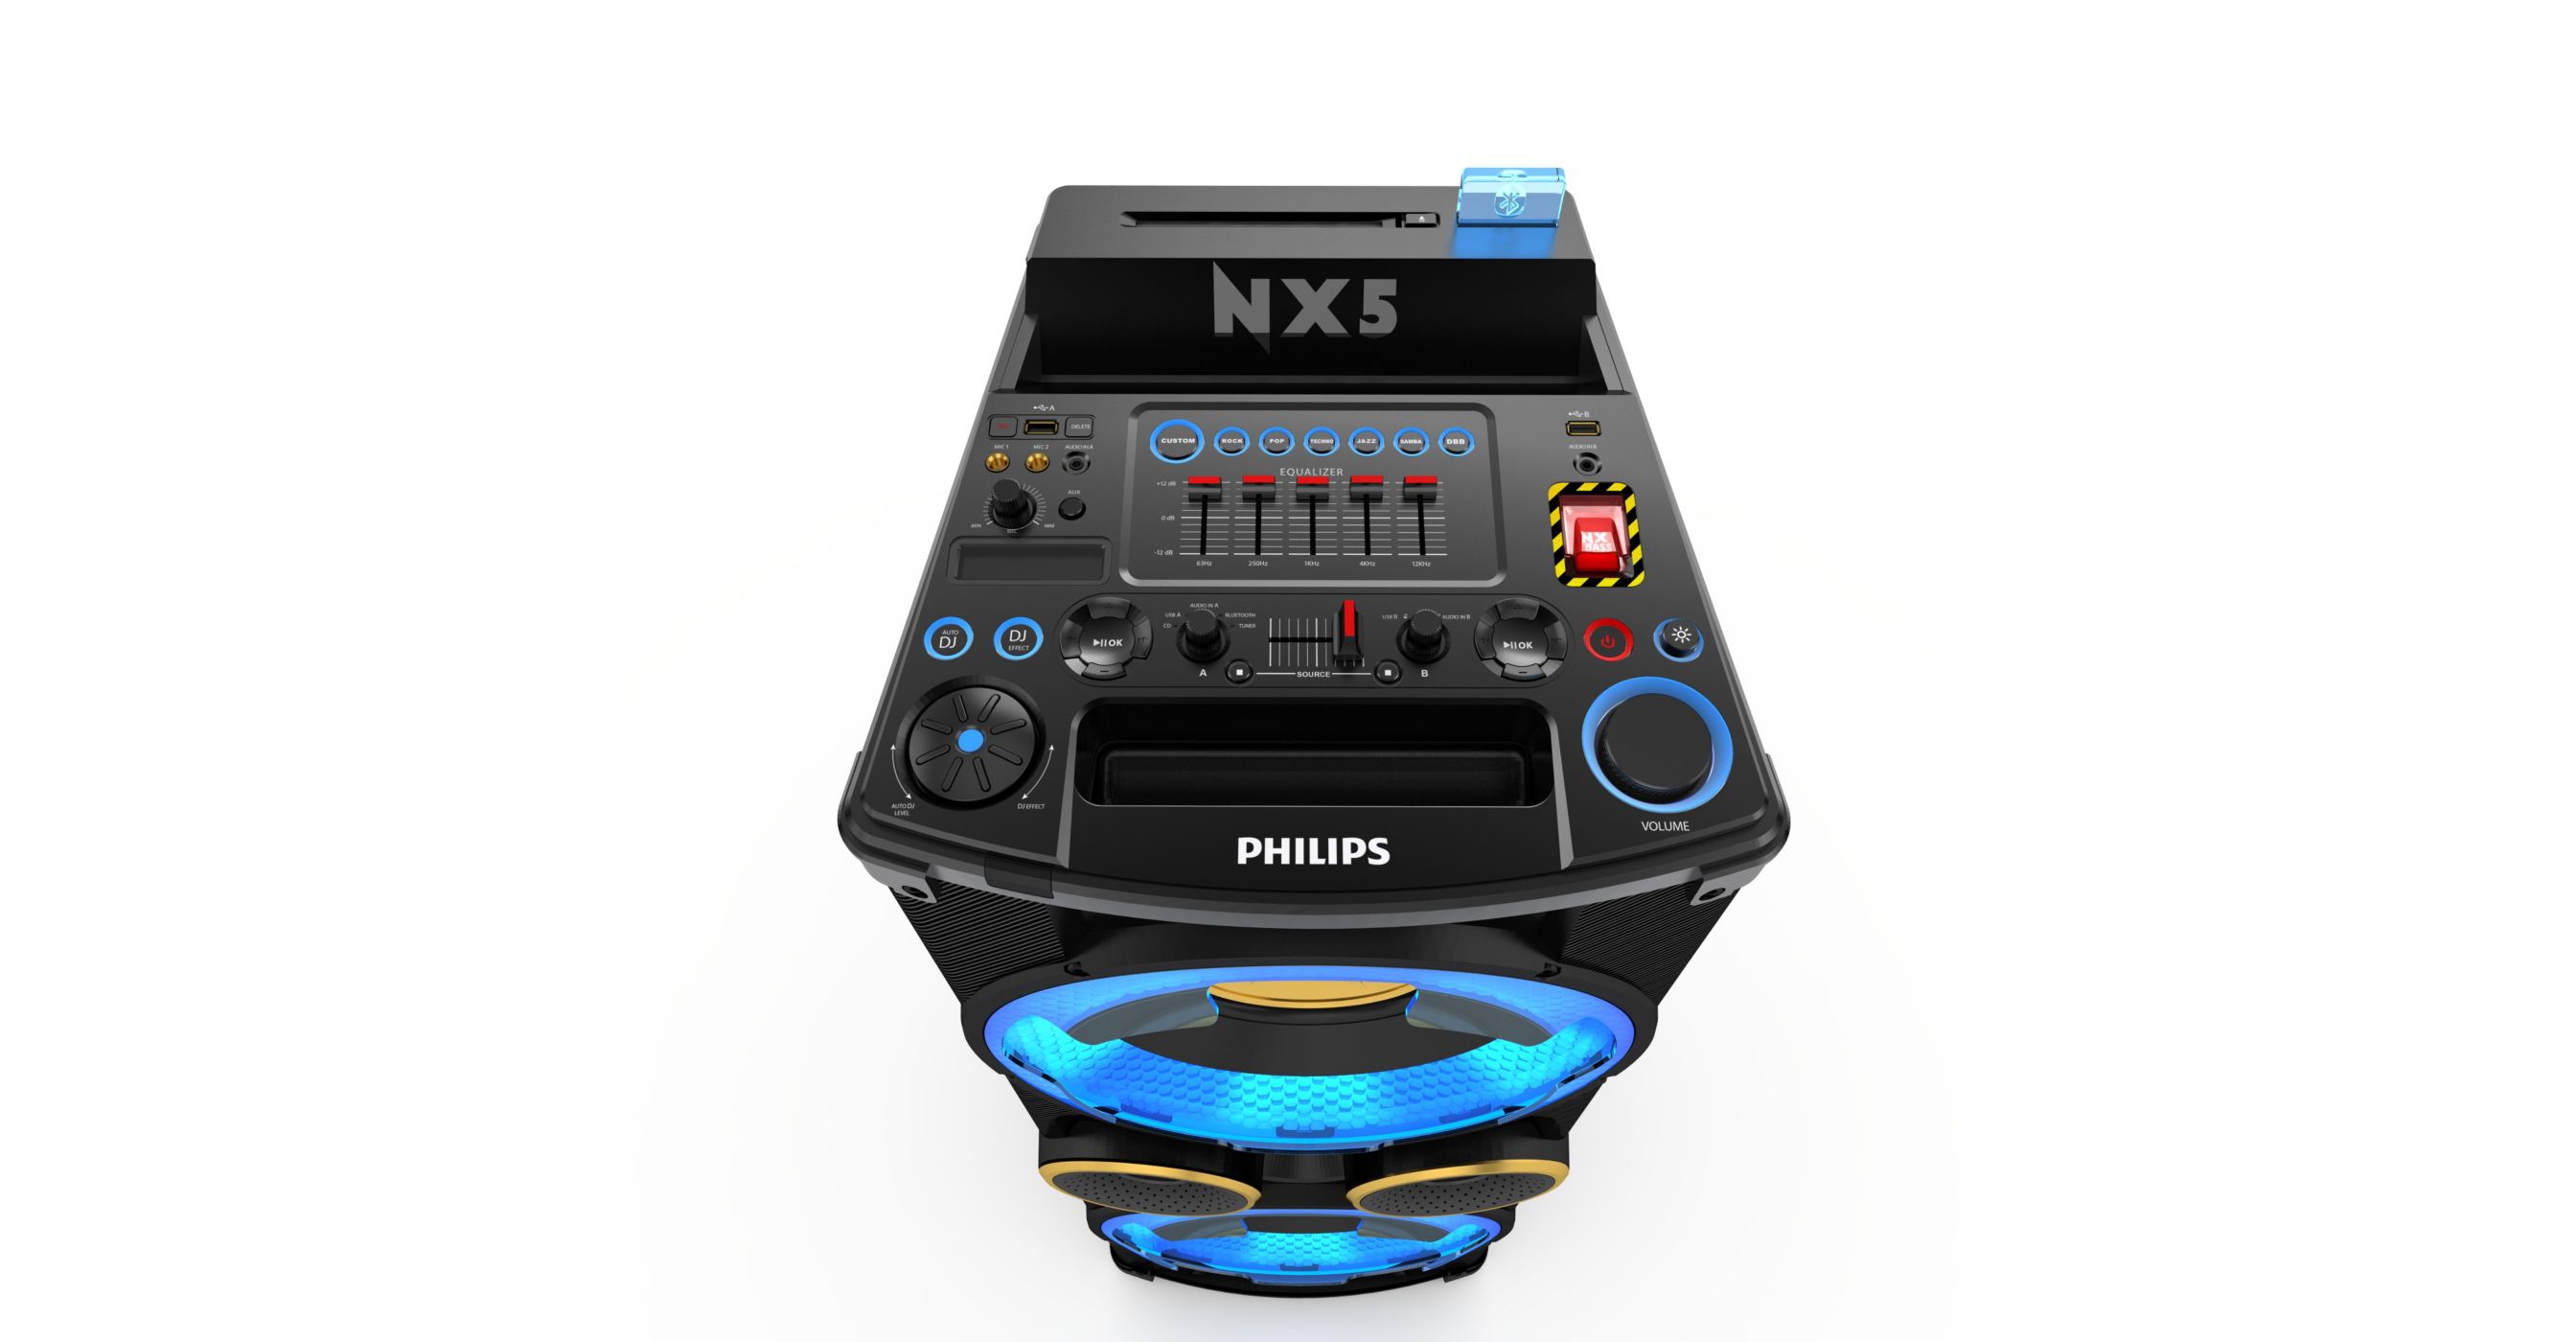 http://images.philips.com/is/image/PhilipsConsumer/NTRX500_10-D3P-global-001?wid=2688&hei=1400&fit=constrain&$jpgsmall$